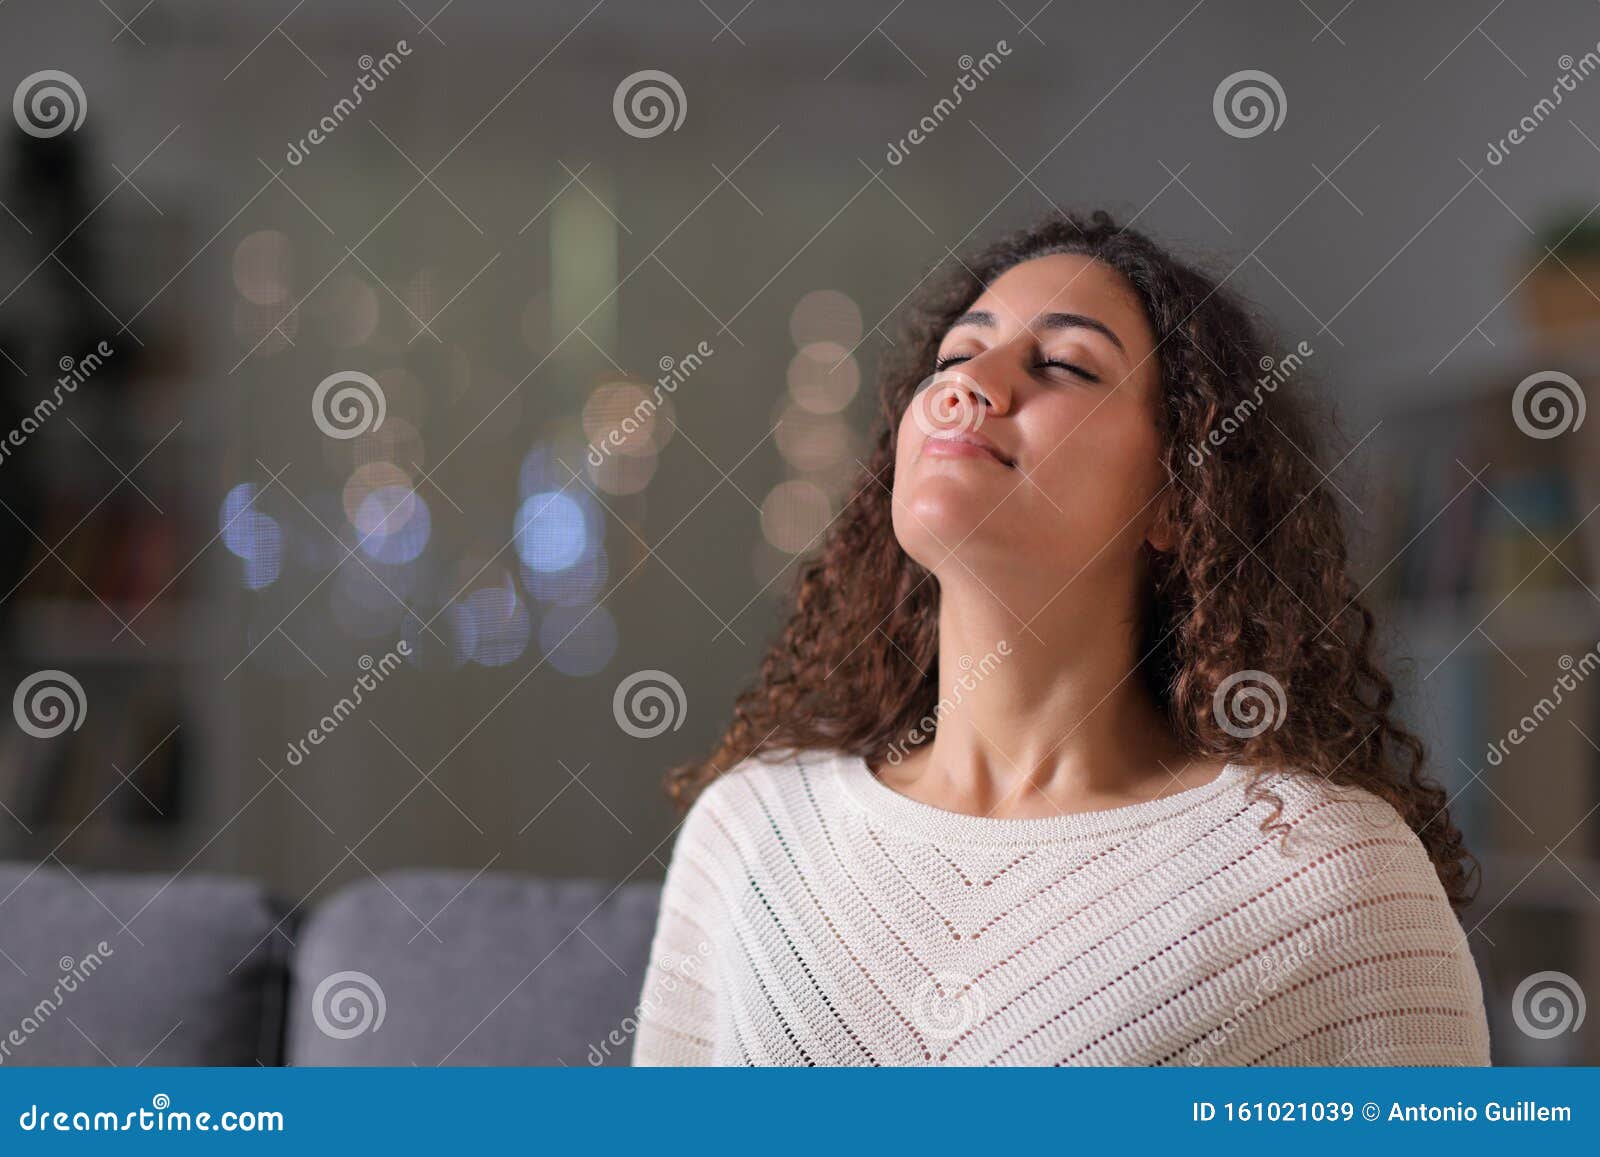 relaxed woman breathing fresh air in the night at home